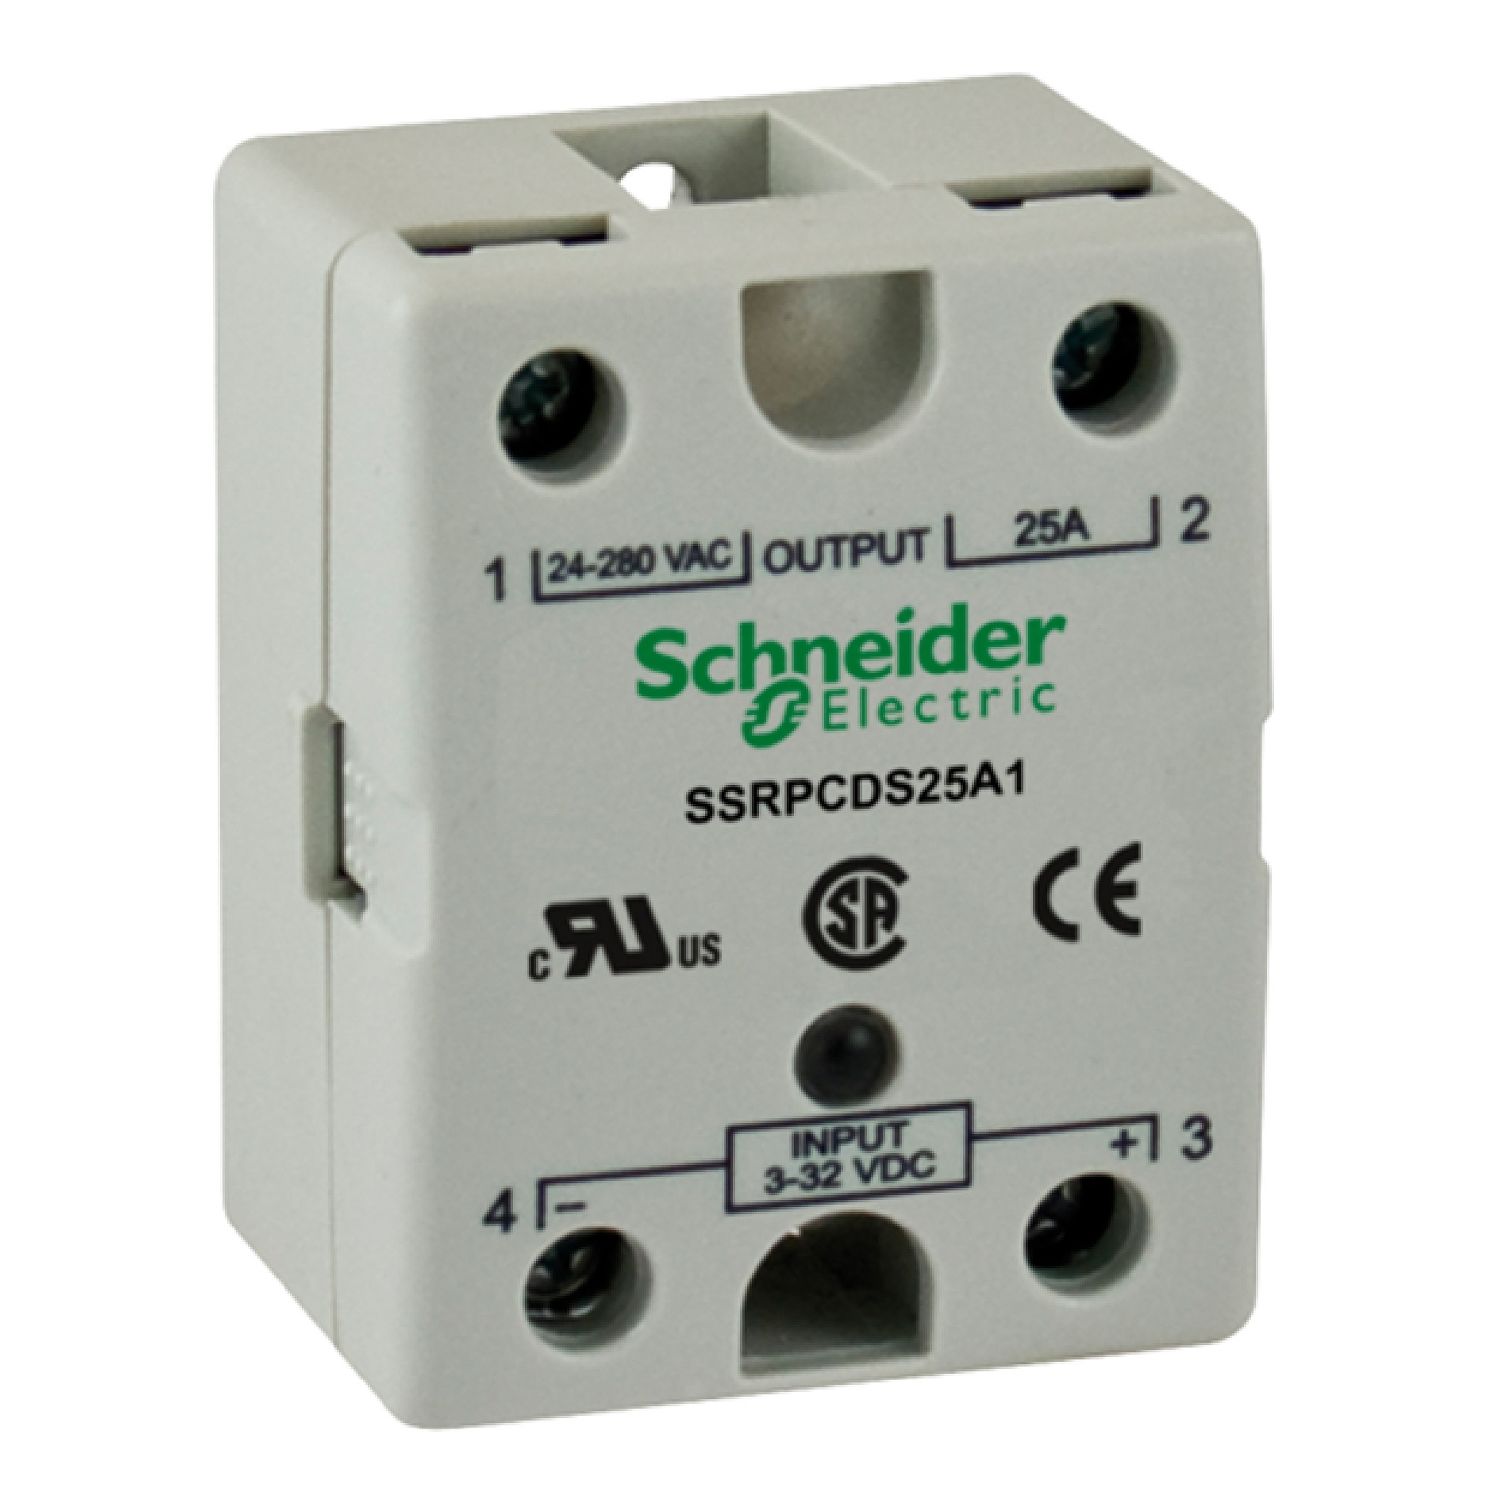 SSRPCDS25A1 solid state relay - panel mounting - input 3-32 V DC, output 24-280 V AC, 25A